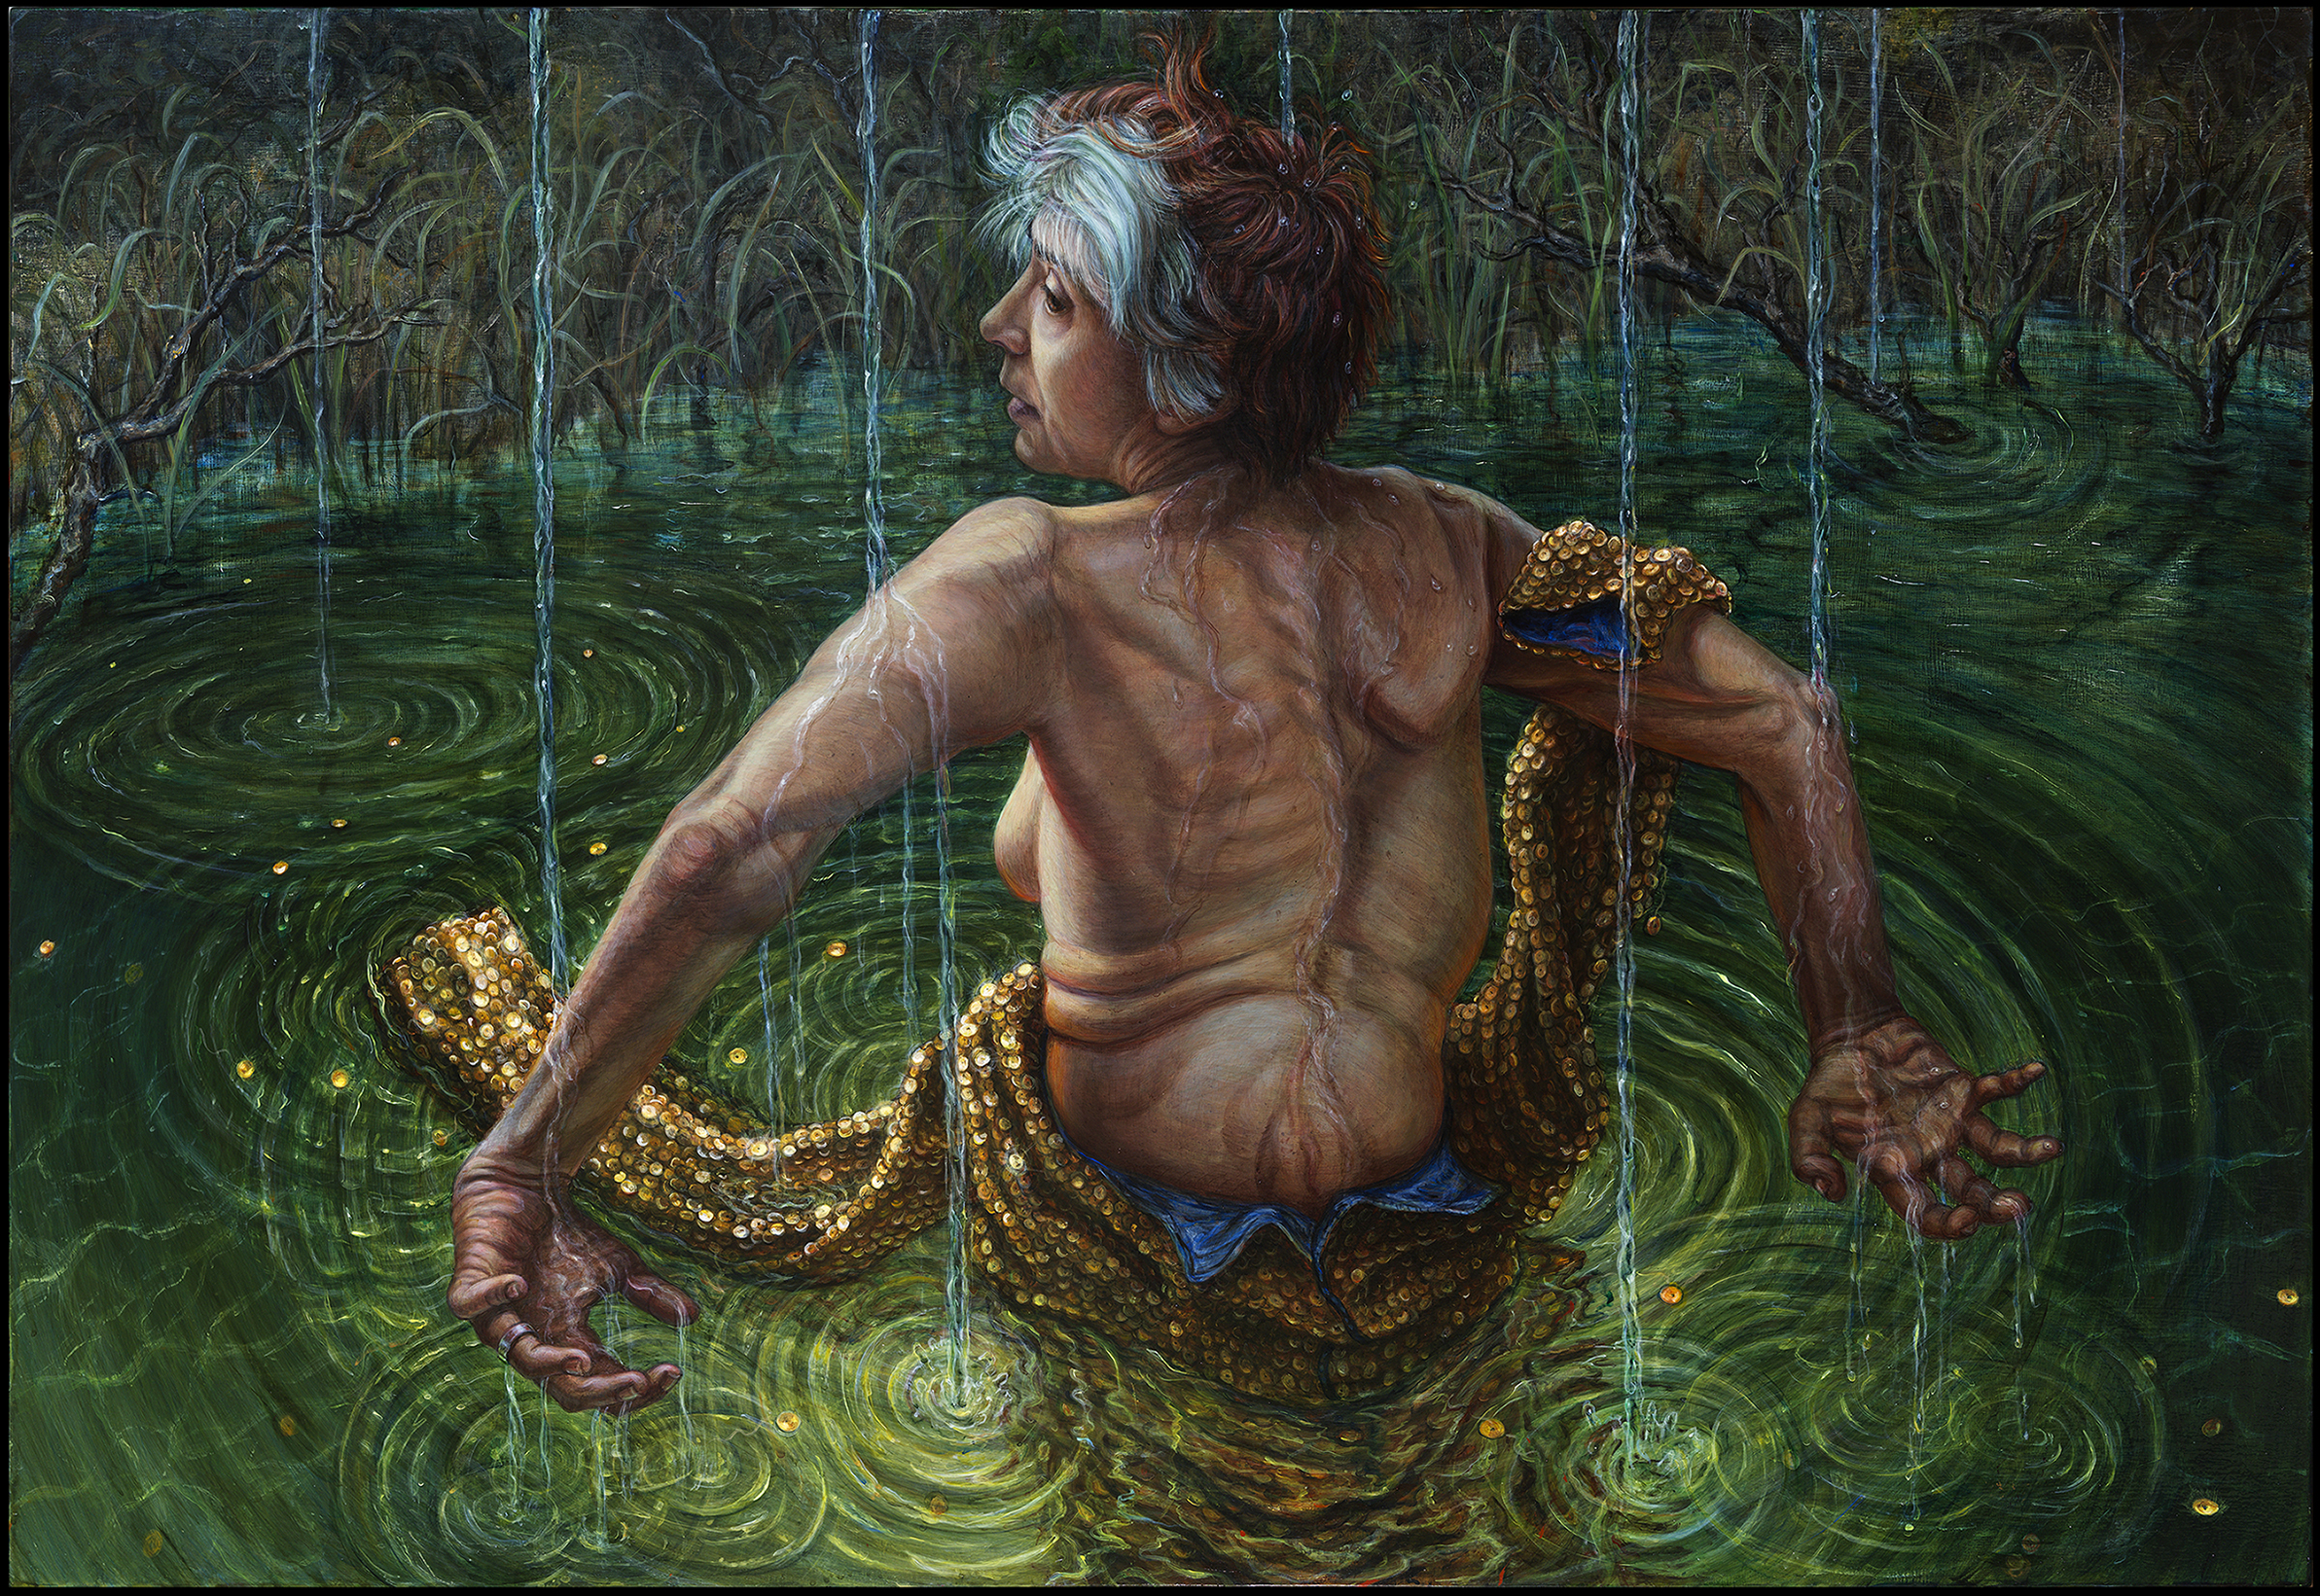 Acrylic on wood, 24 x 36”, 2016. A nude self-portrait from the back, showing the curve of my scoliosis. I stand in a green pond at night, my arms bent and angled downward. Water is pouring in discreet streams from the sky and making ripples on the pond.